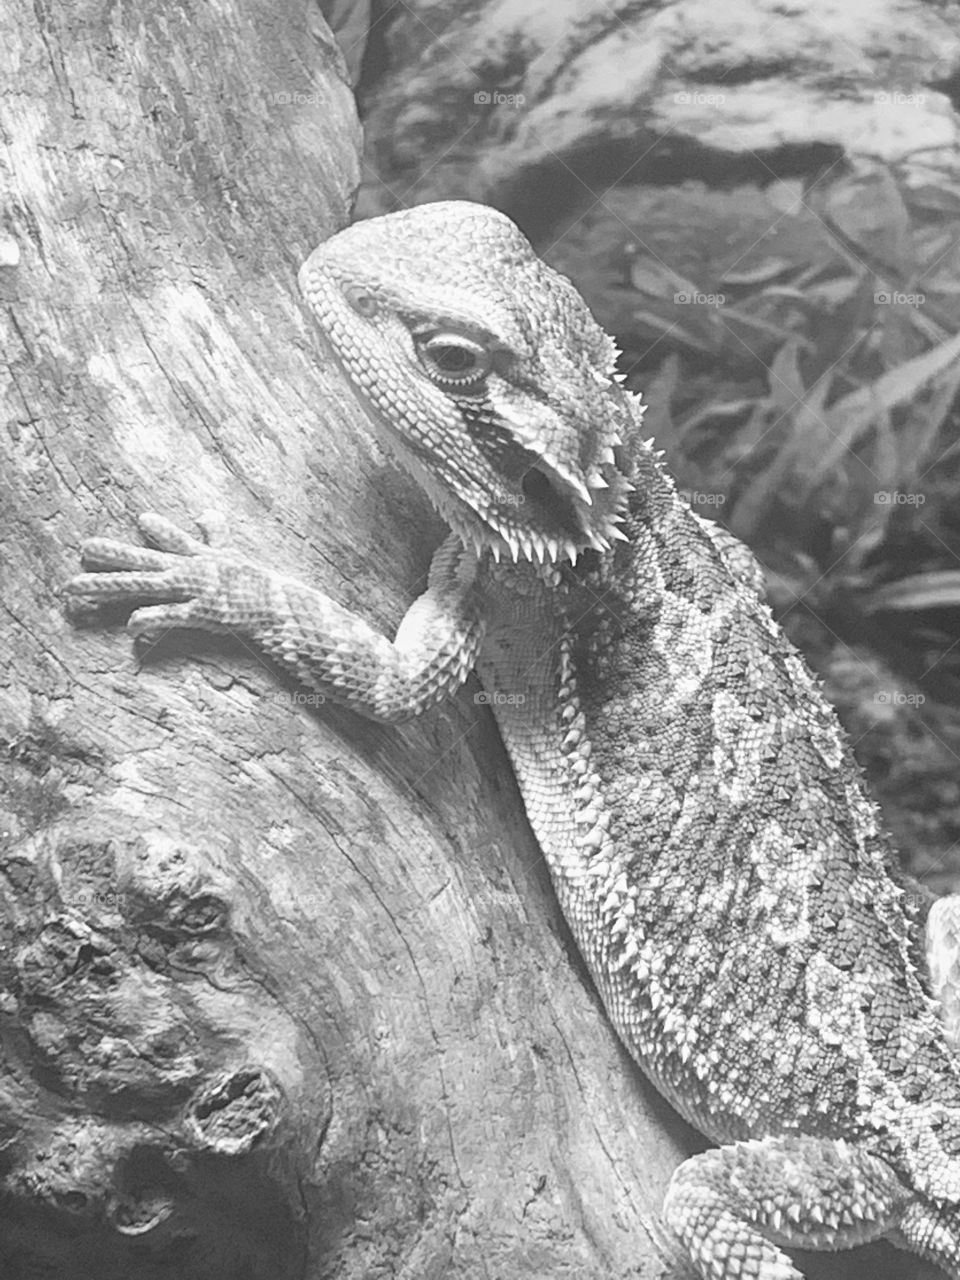 Bearded dragon in black and white 